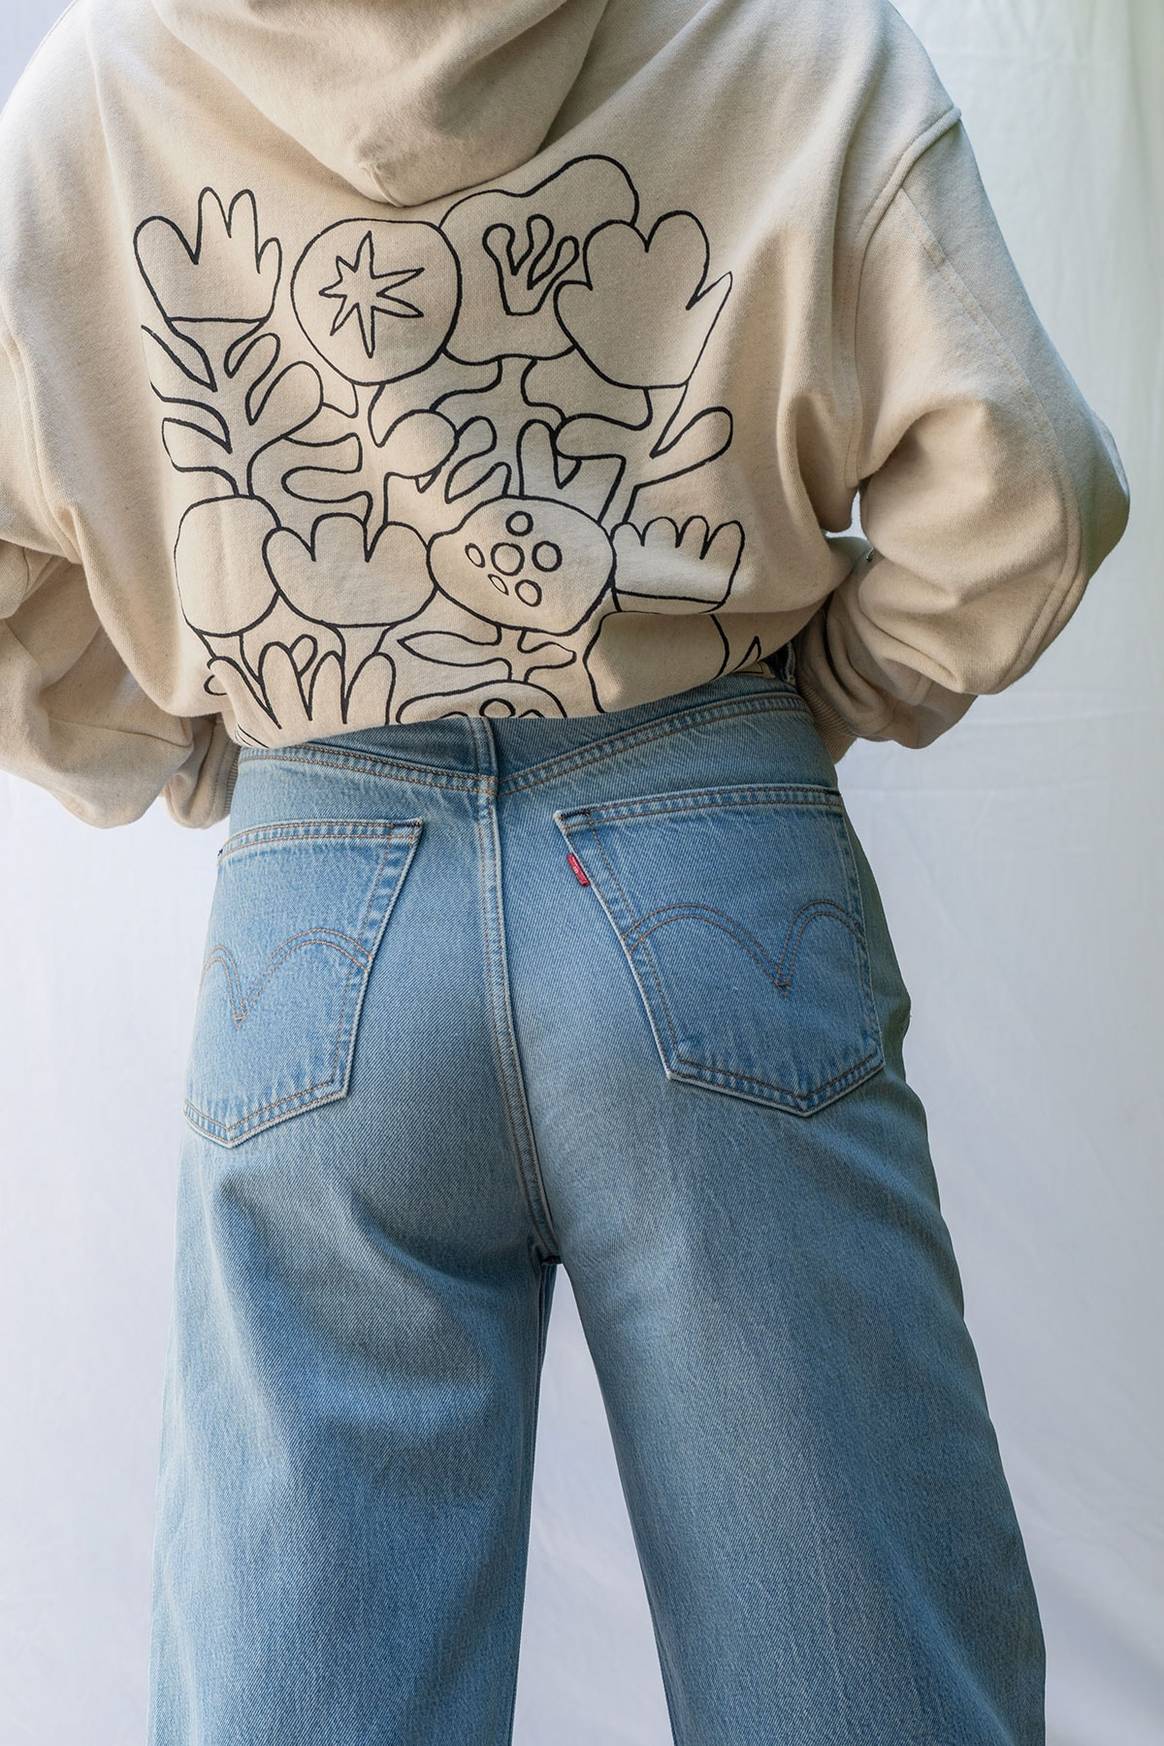 Levi’s unveils its most sustainable jeans to date